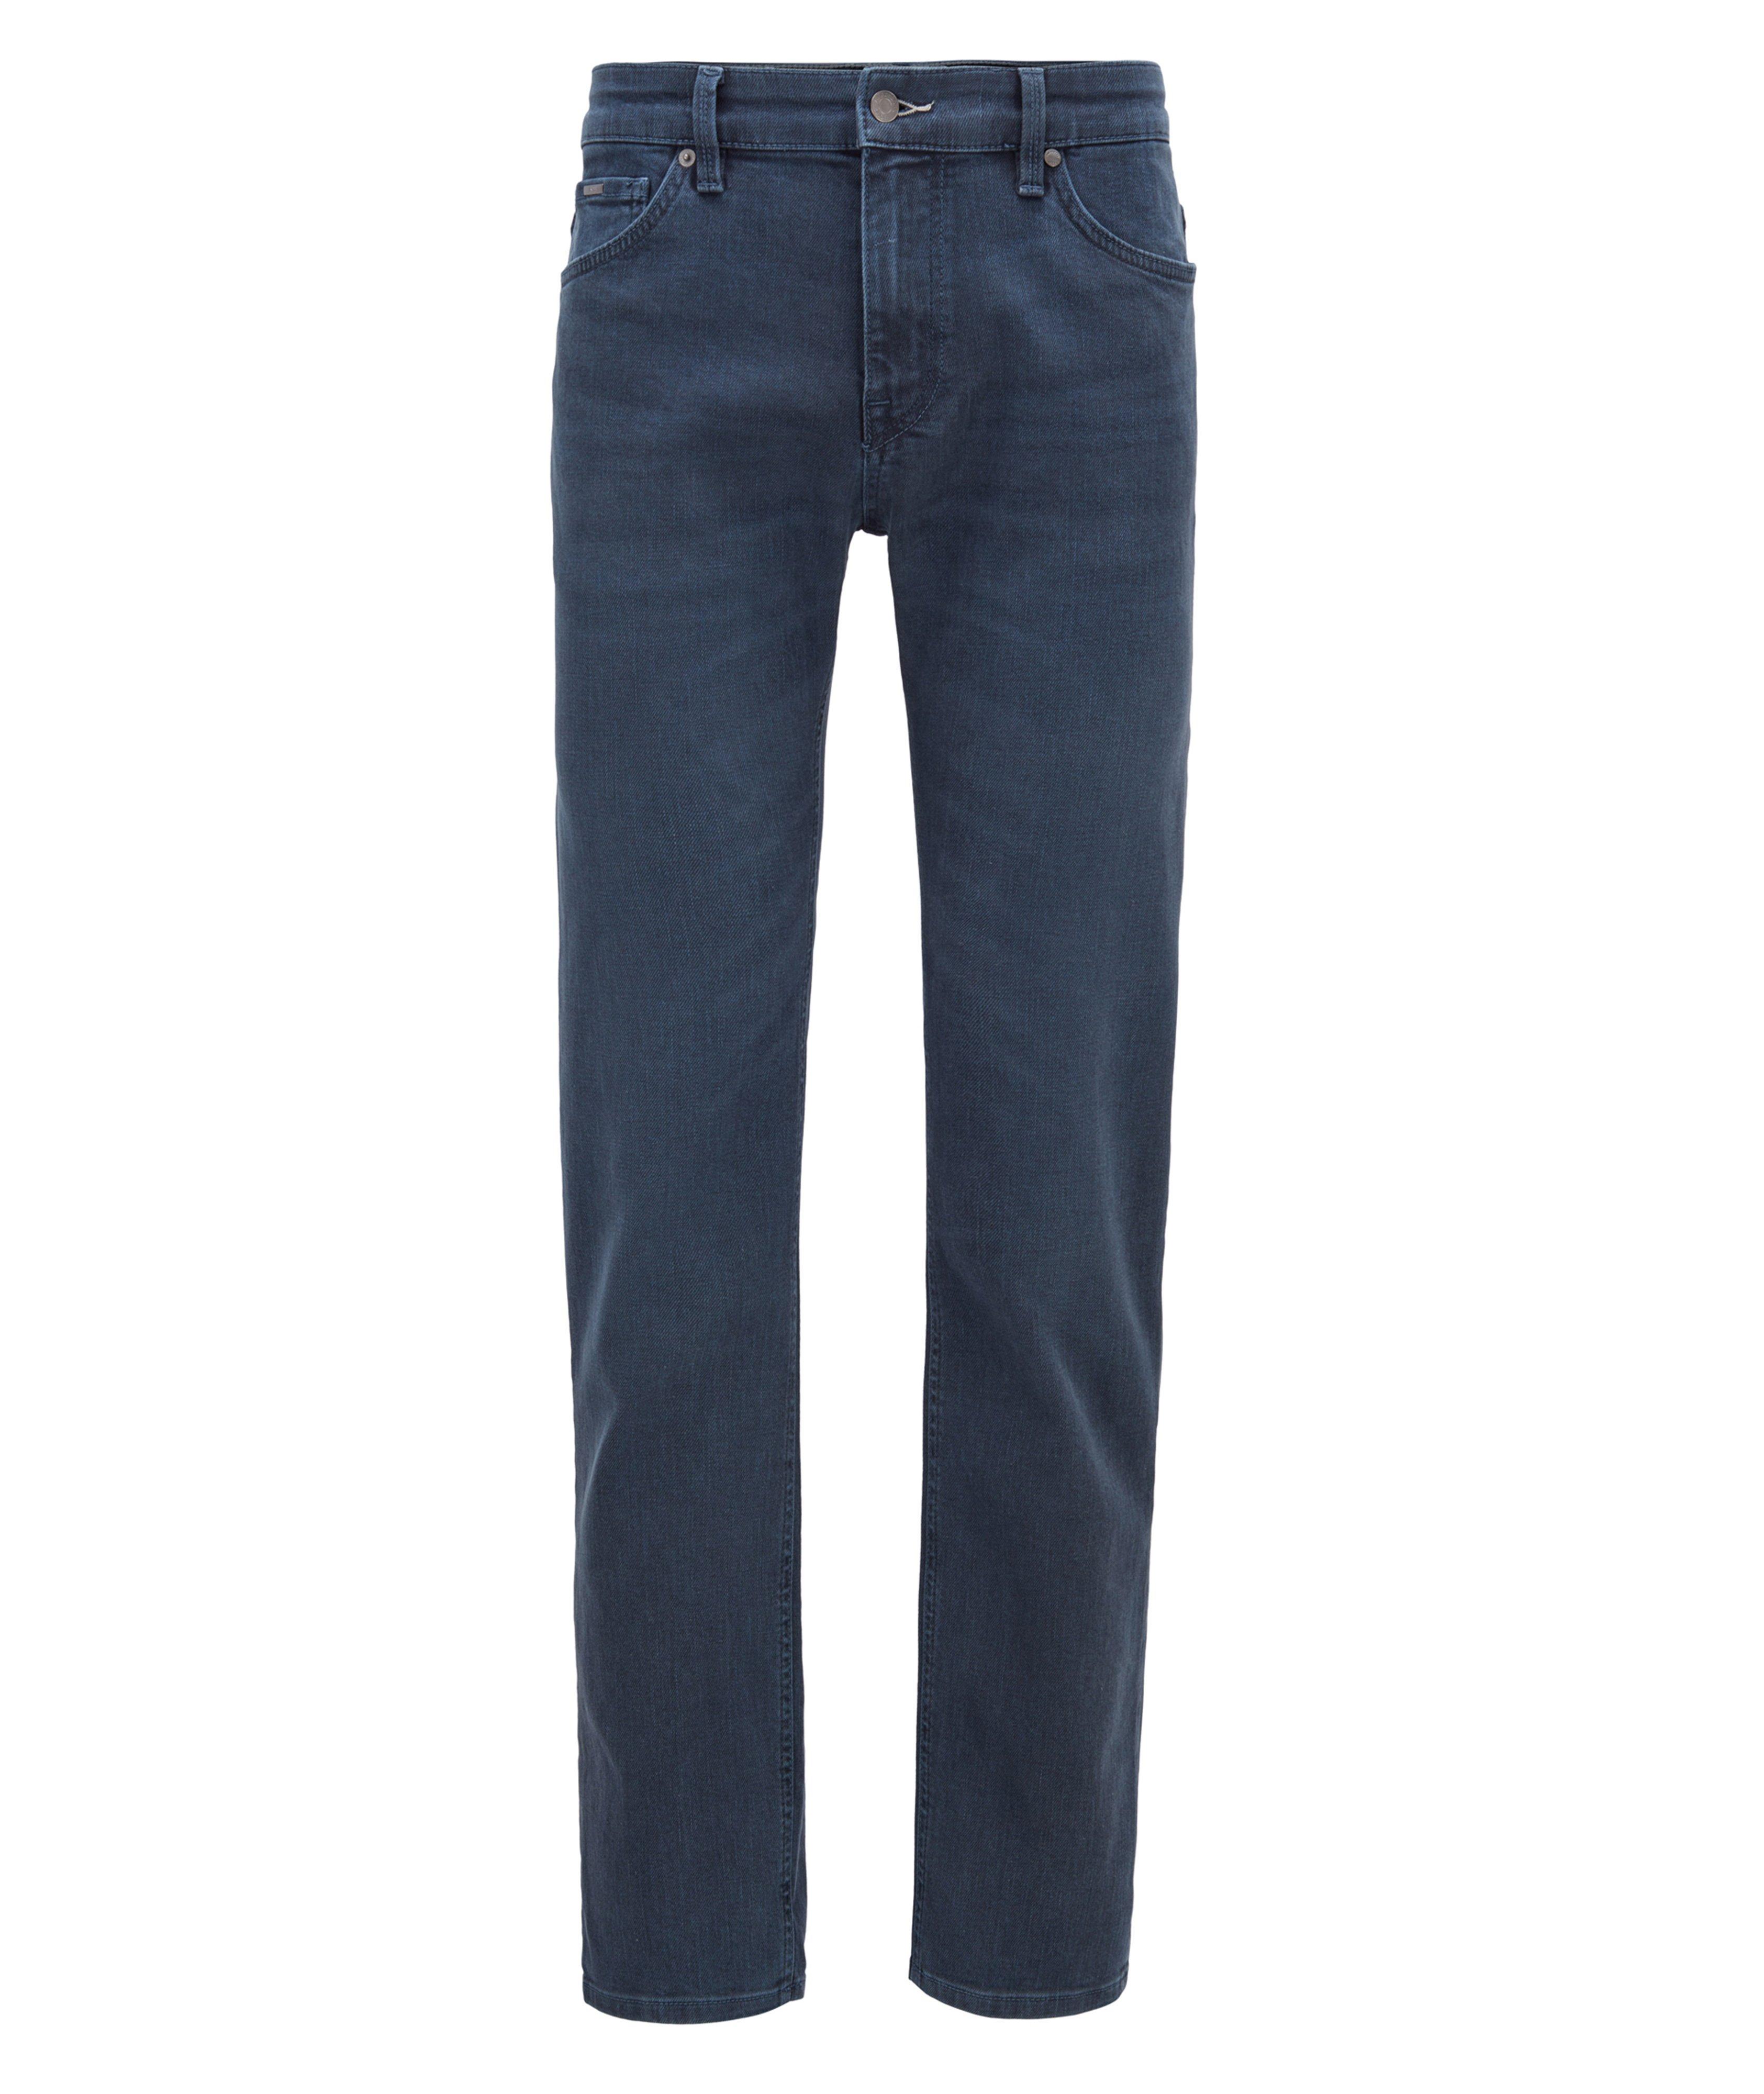 Maine3 Straight-Fit Jeans image 0